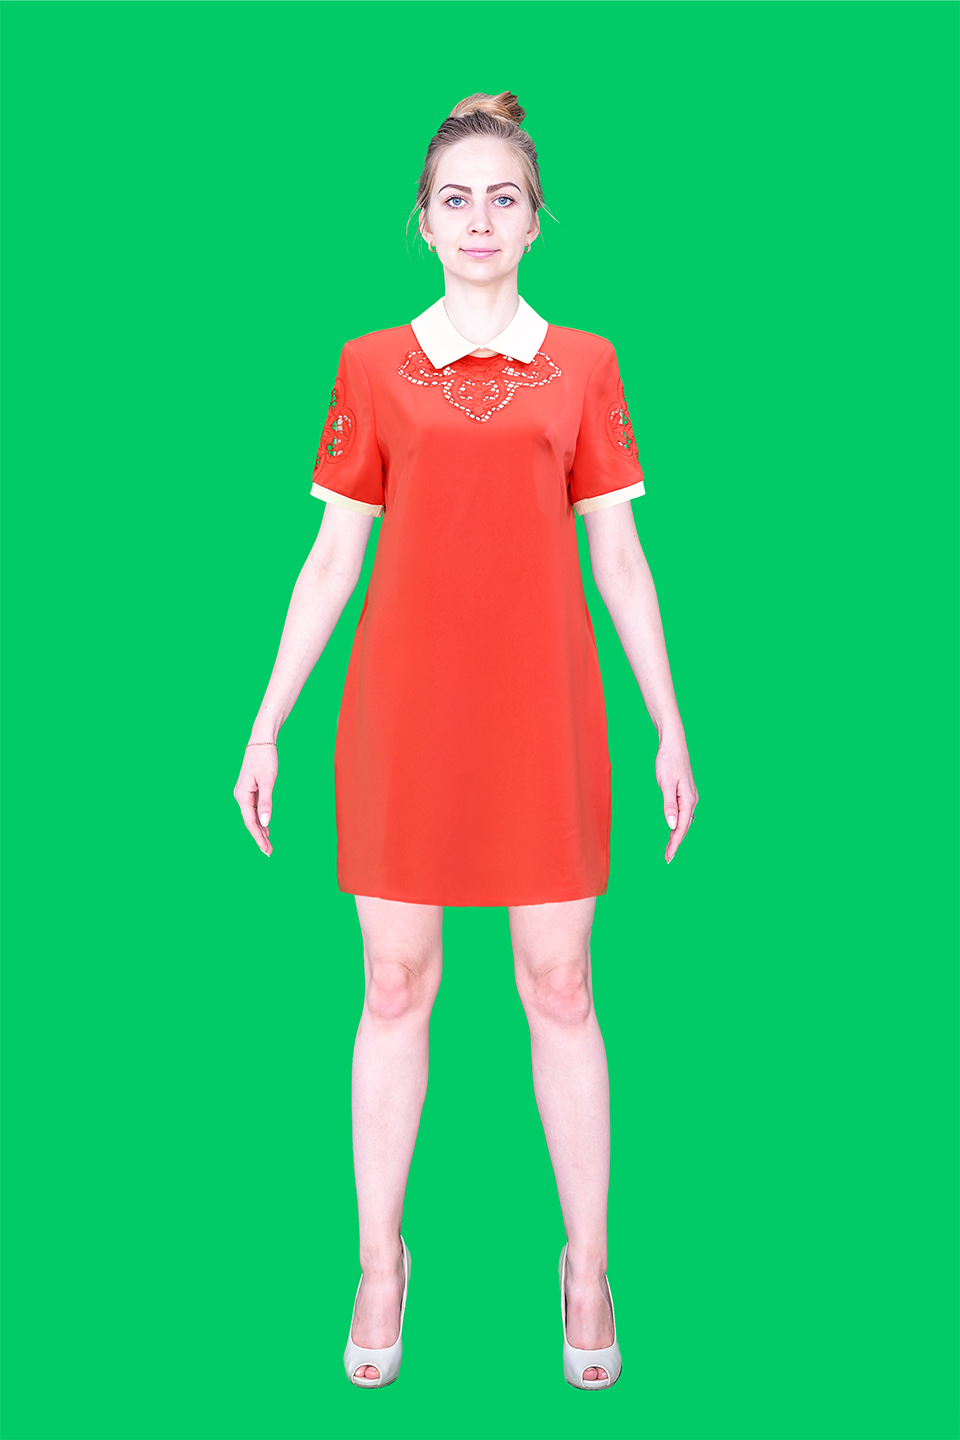 Dress superimposed on photograph